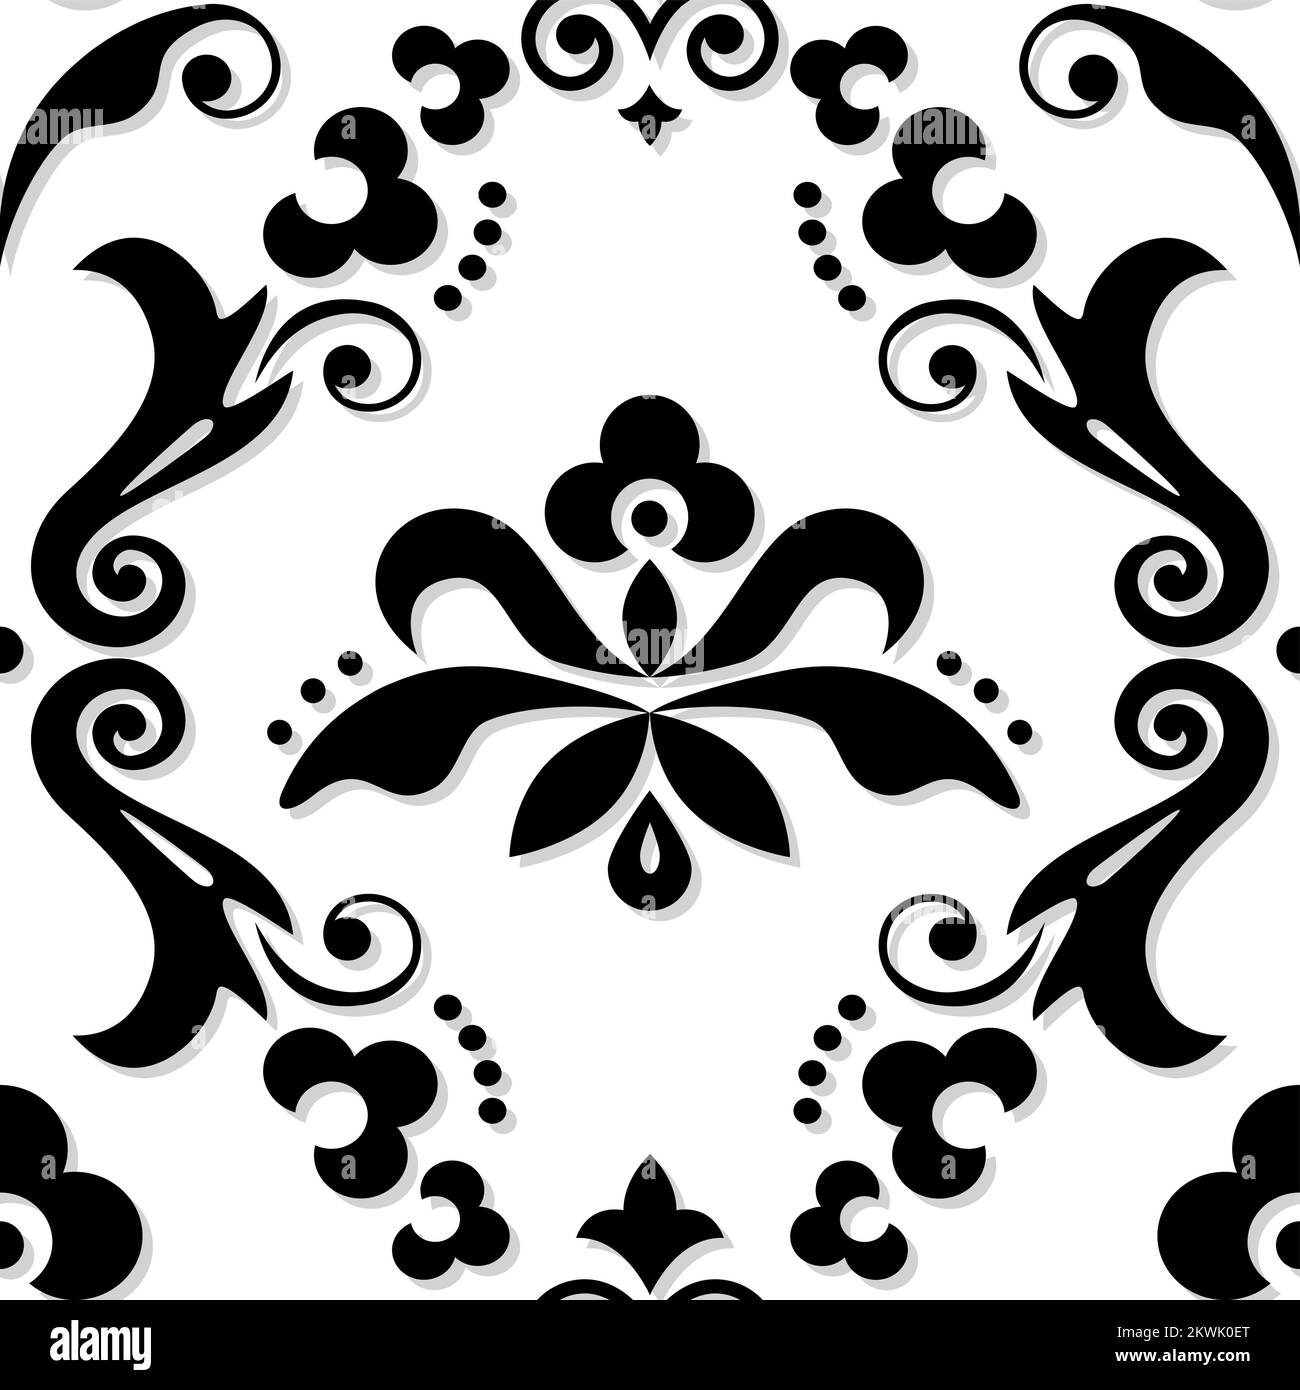 Damask royal vector seamless textile or farbic print pattern, classic victorian repetitive design with flowers, swirls and leaves in black on white Stock Vector